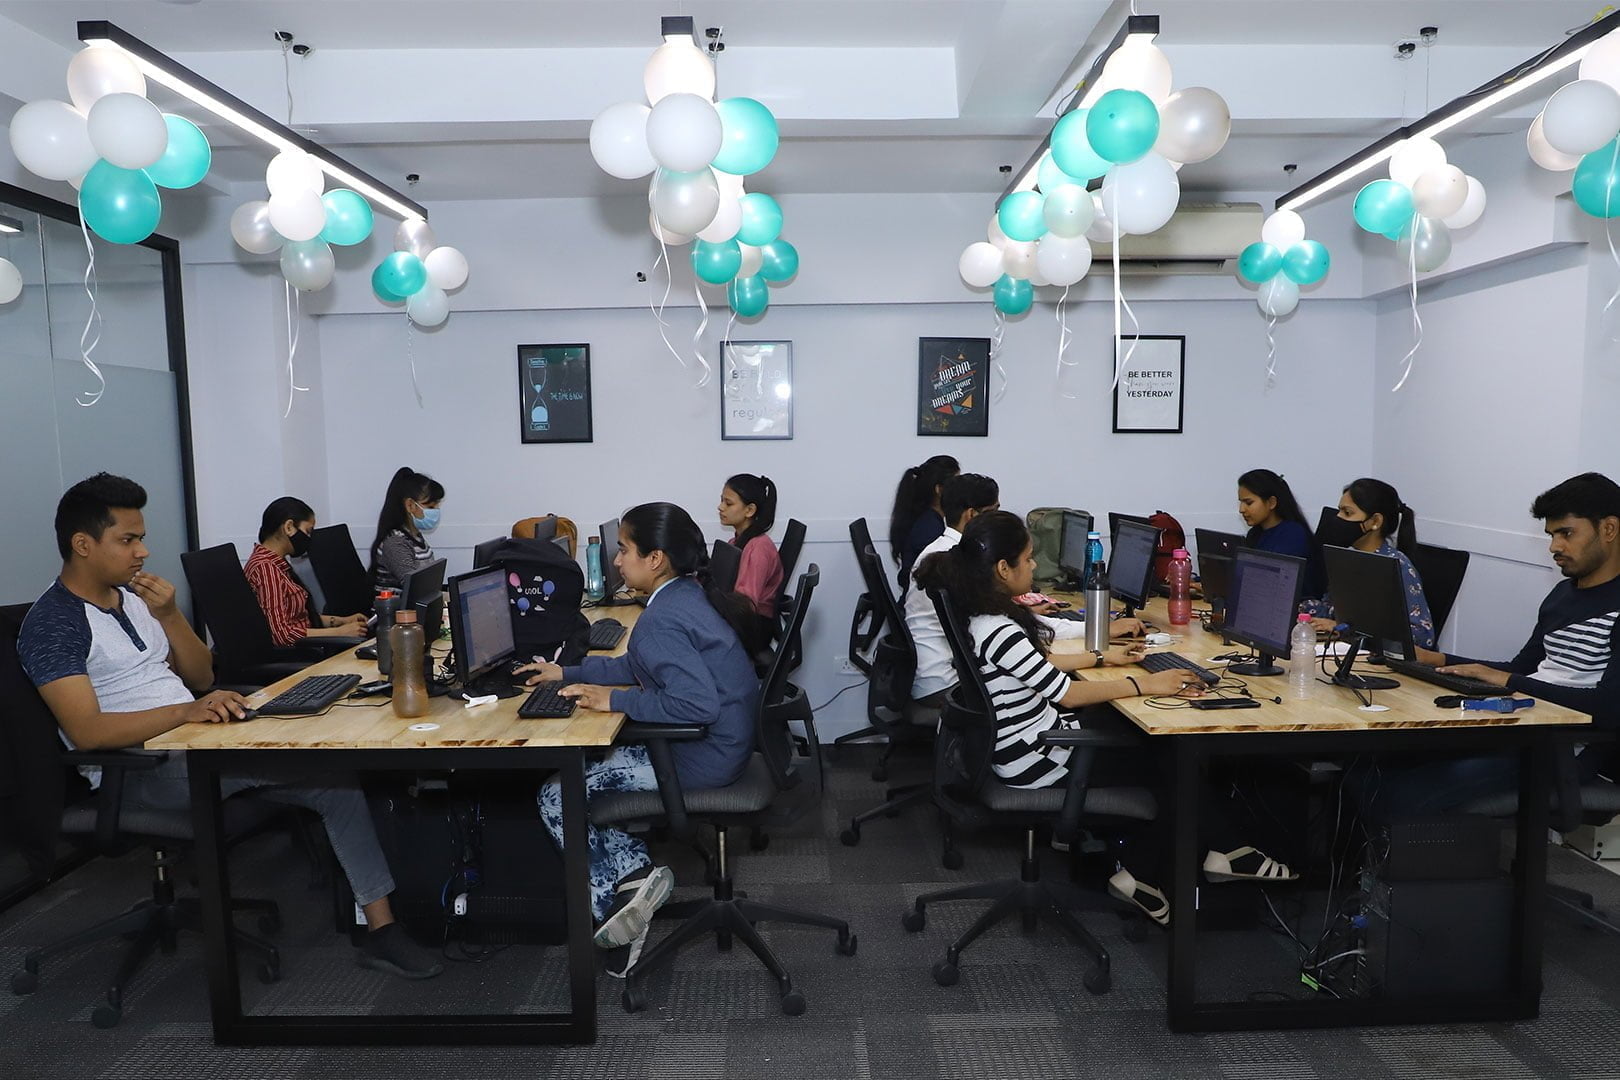 Coworking Spaces: Corporate’s New BFF to Cut Costs